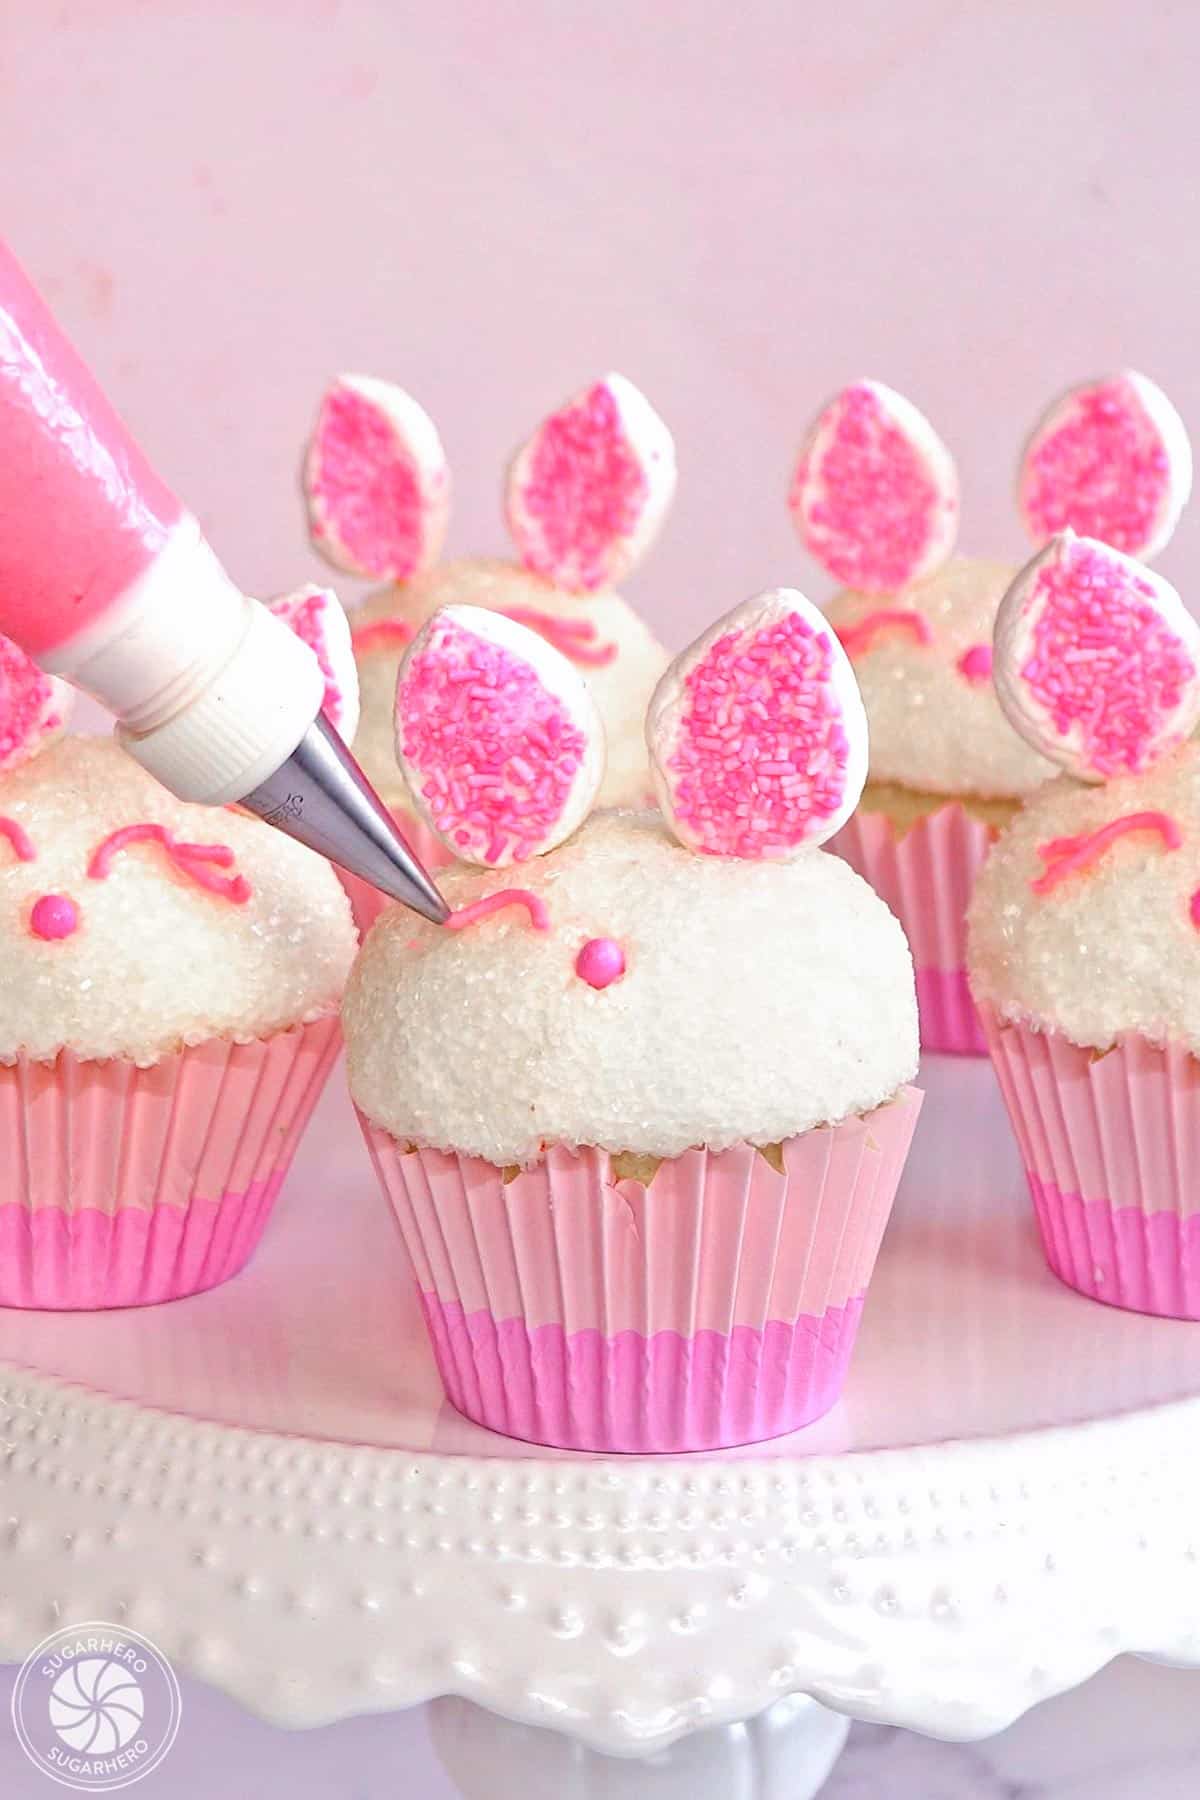 Piping pink buttercream eyes onto an Easter Bunny Cupcake.